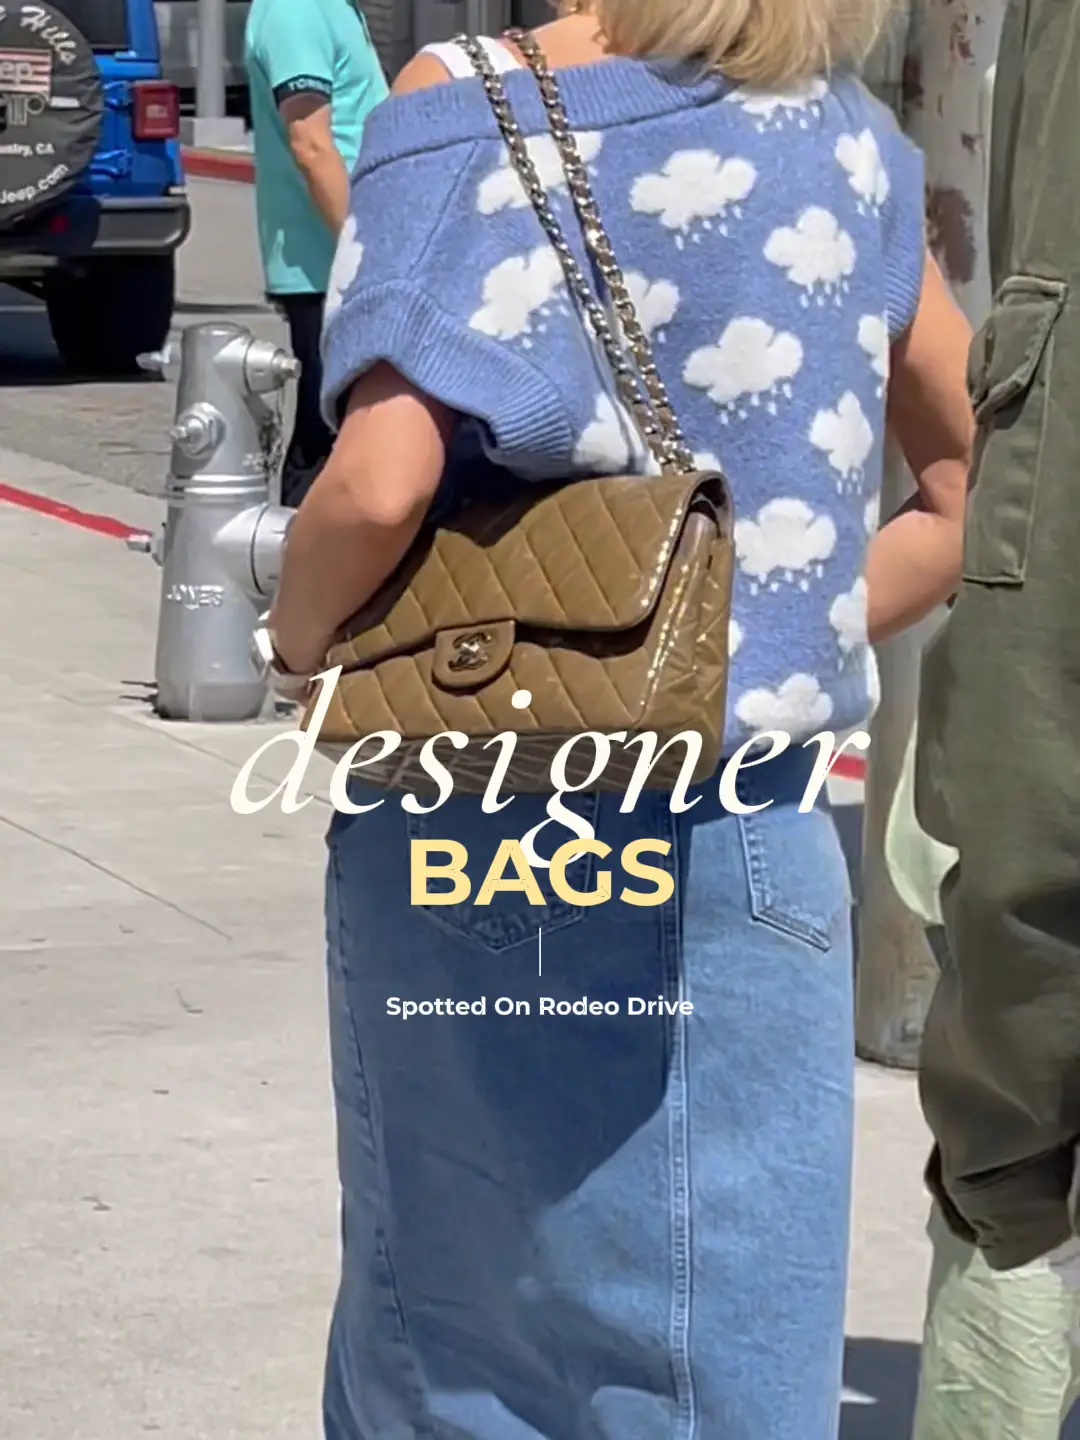 DESIGNER BAGS SPOTTED ON RODEO DRIVE, Video published by WhatPeopleWear